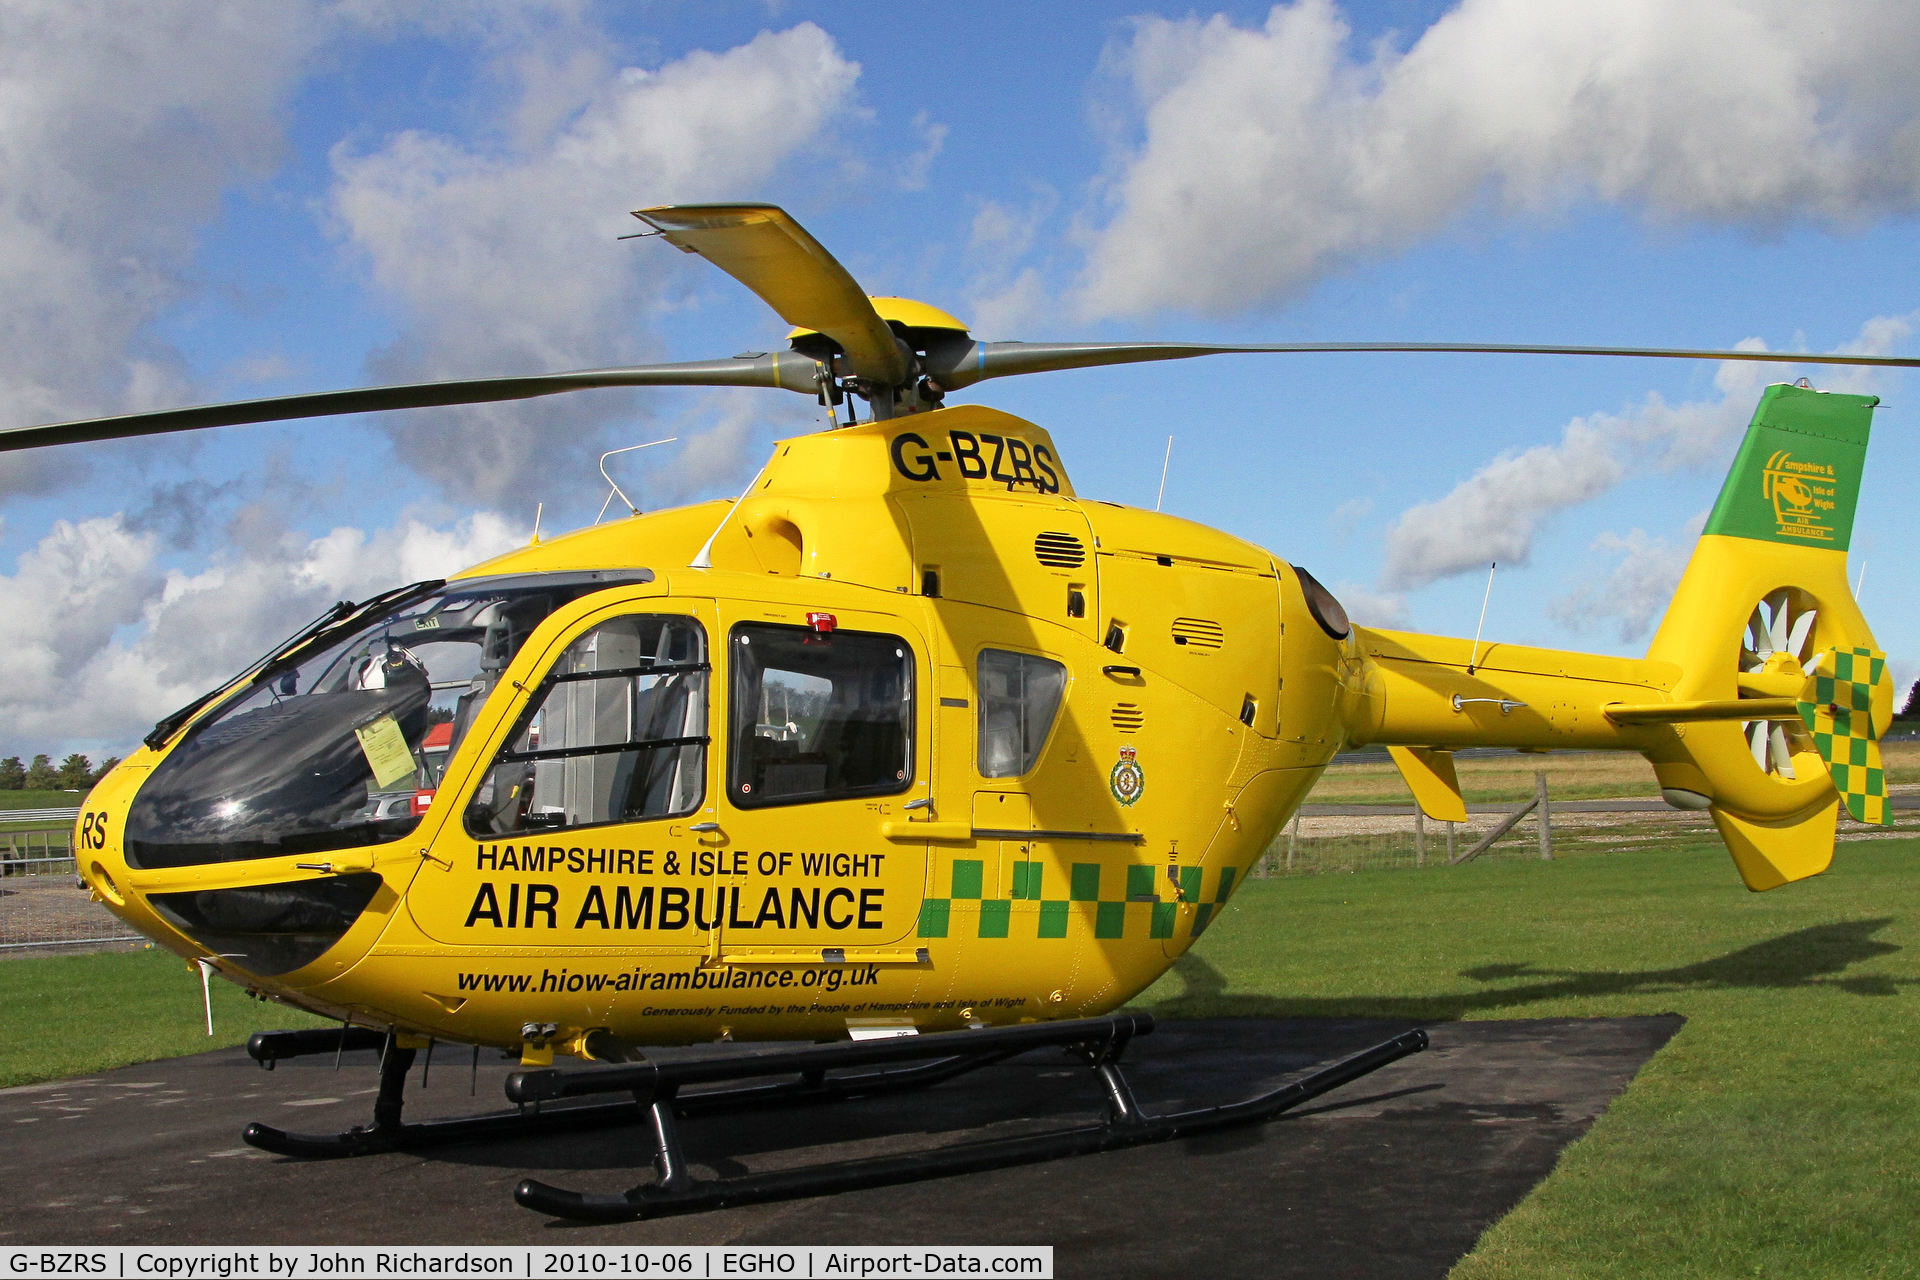 G-BZRS, 2000 Eurocopter EC-135T-2 C/N 0166, In her new colour scheme for Hampshire ans IOW Air Ambulance. Seen at Thruxton